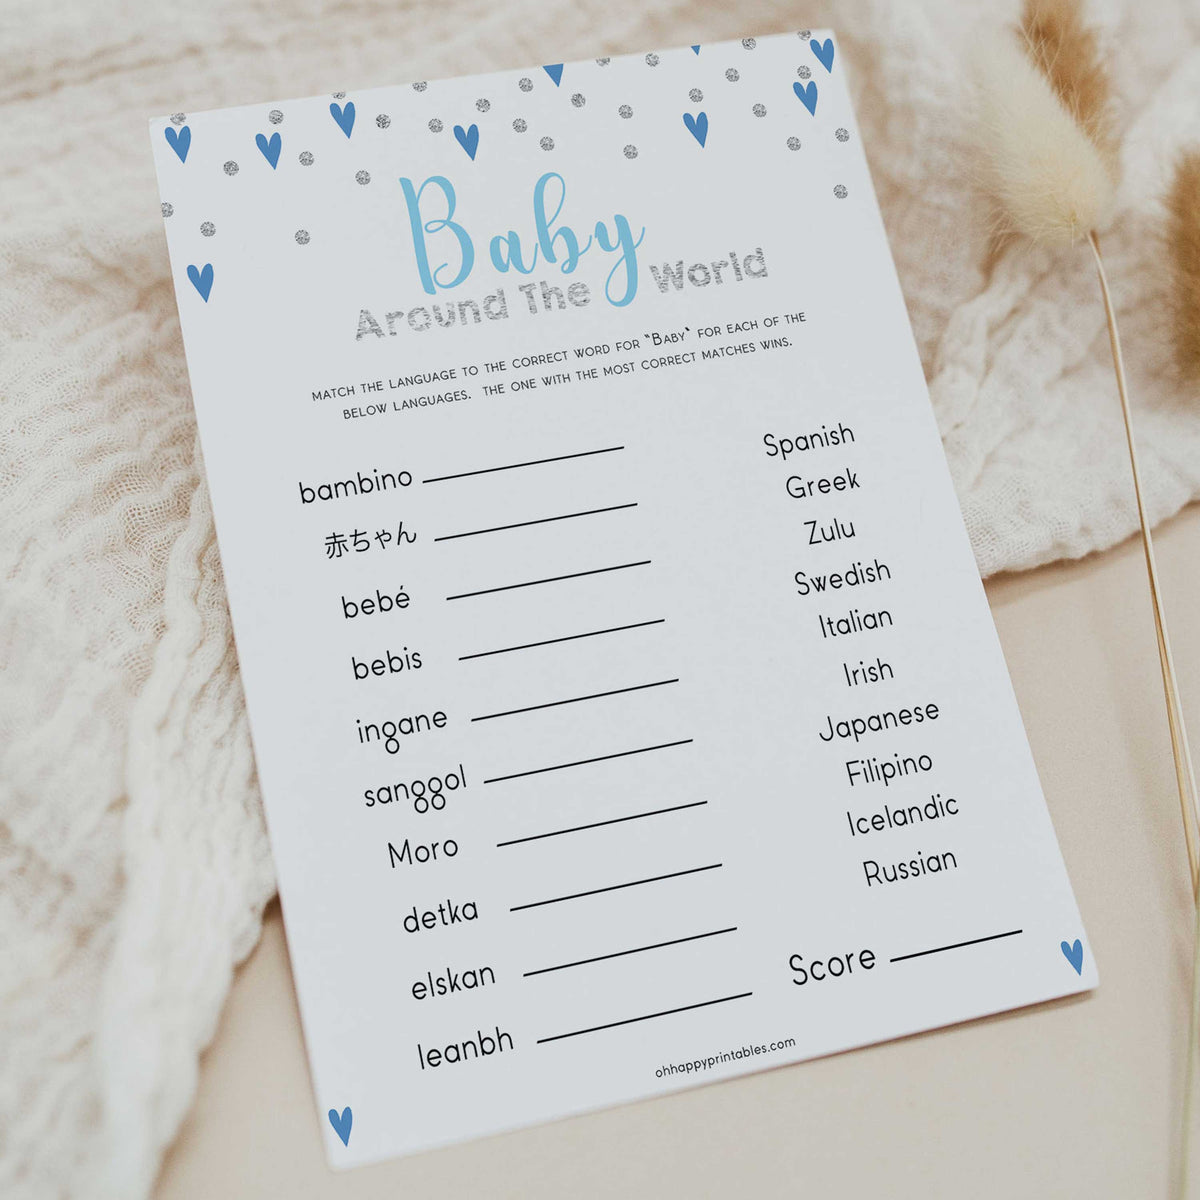 Blue hearts baby games, baby around the world game, printable baby games, boy baby games, blue hearts baby shower, top baby games, fun baby games, popular baby games